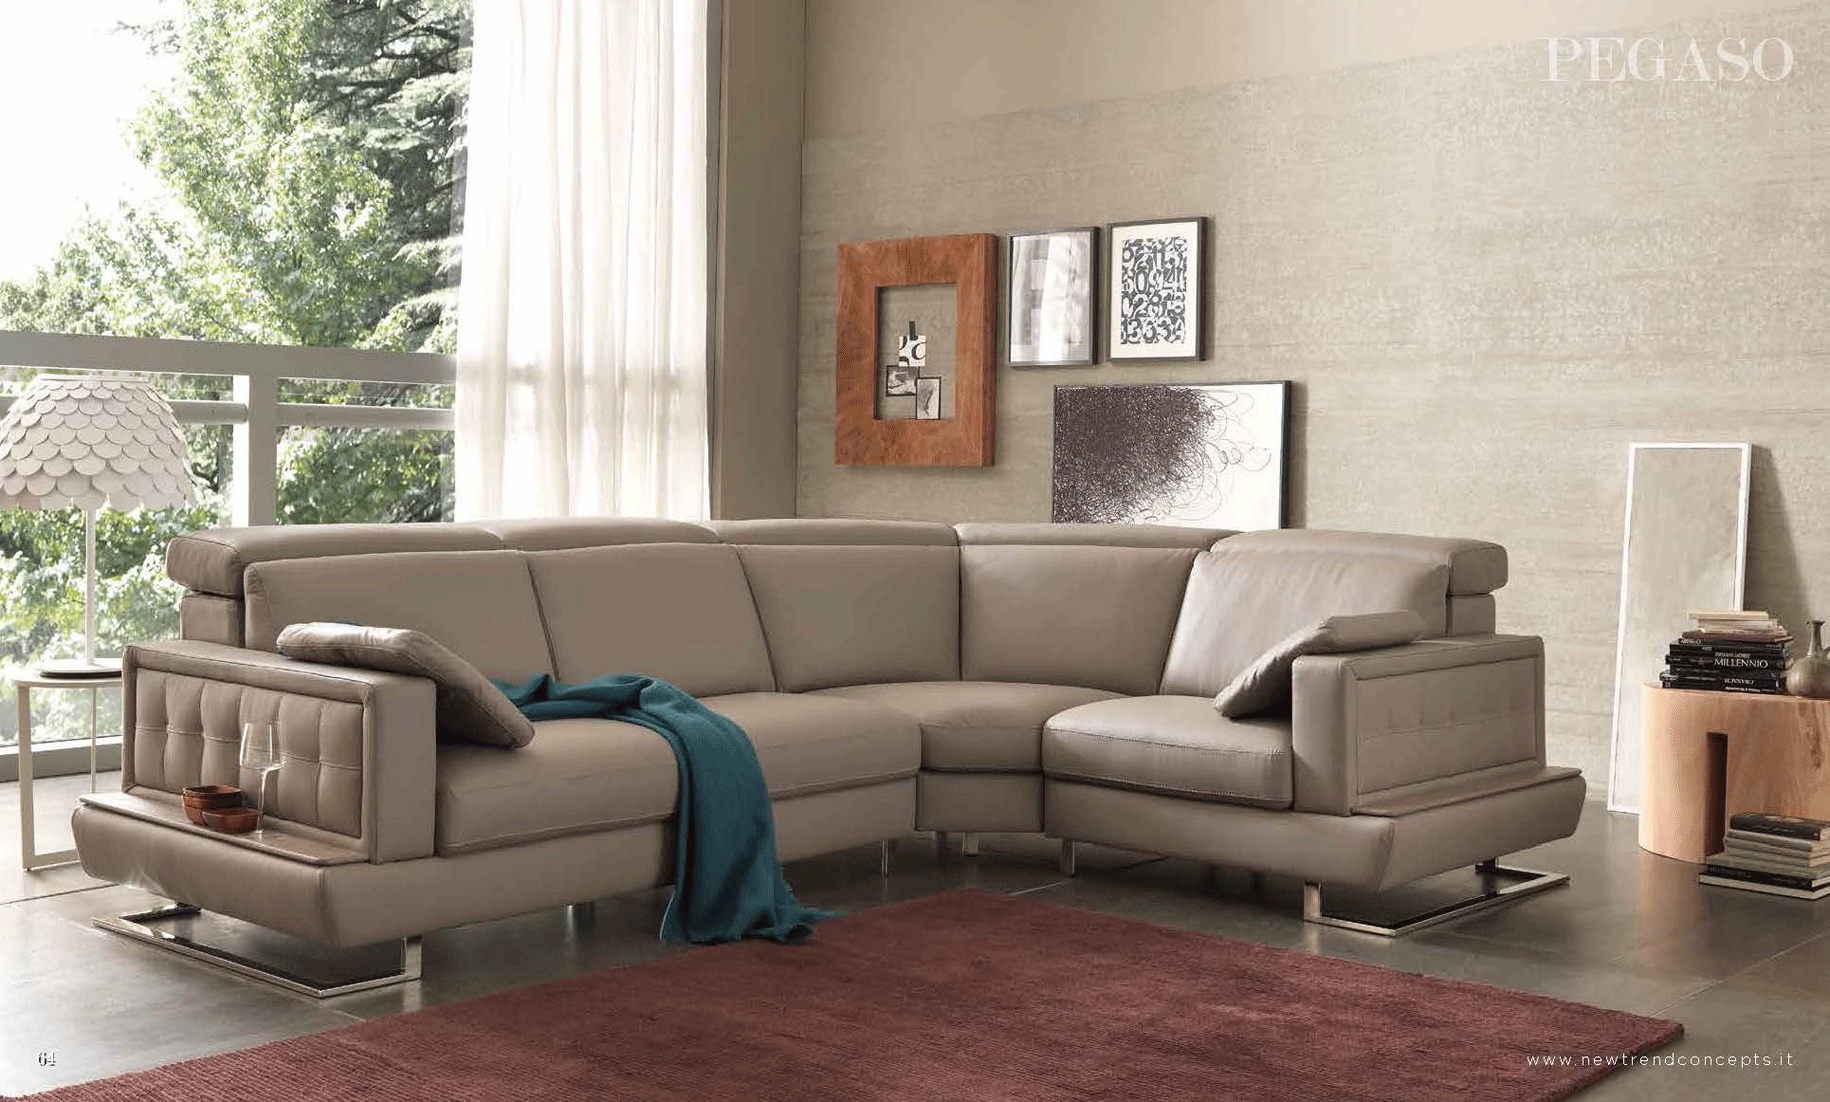 Living Room Furniture New Trend Concepts Urban Living Room Collection Pegaso